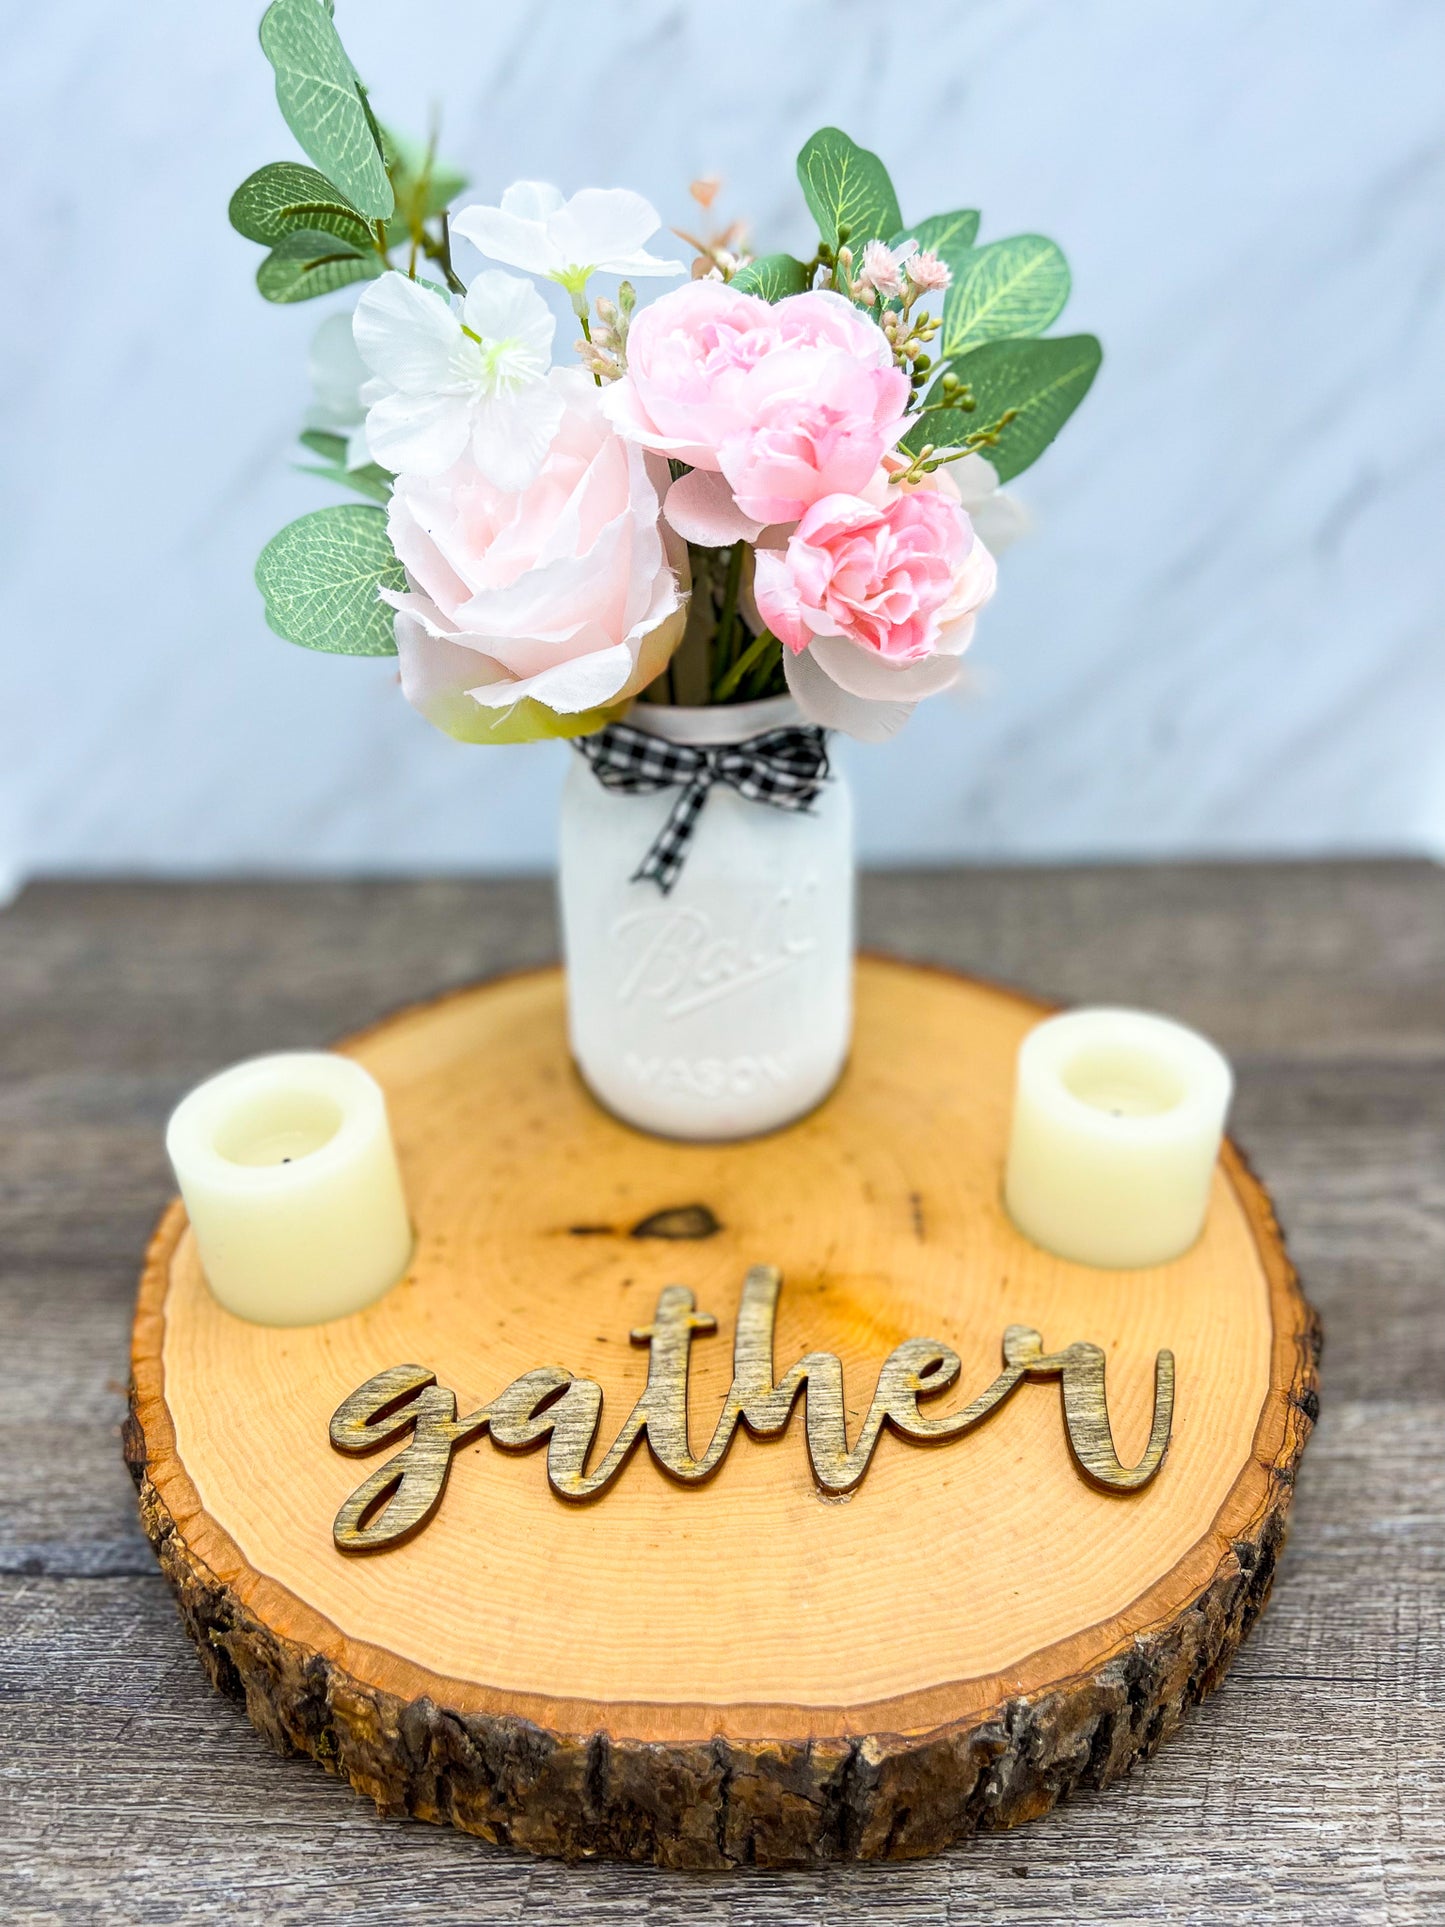 Wooden Center Piece With Mason Jar and Candles